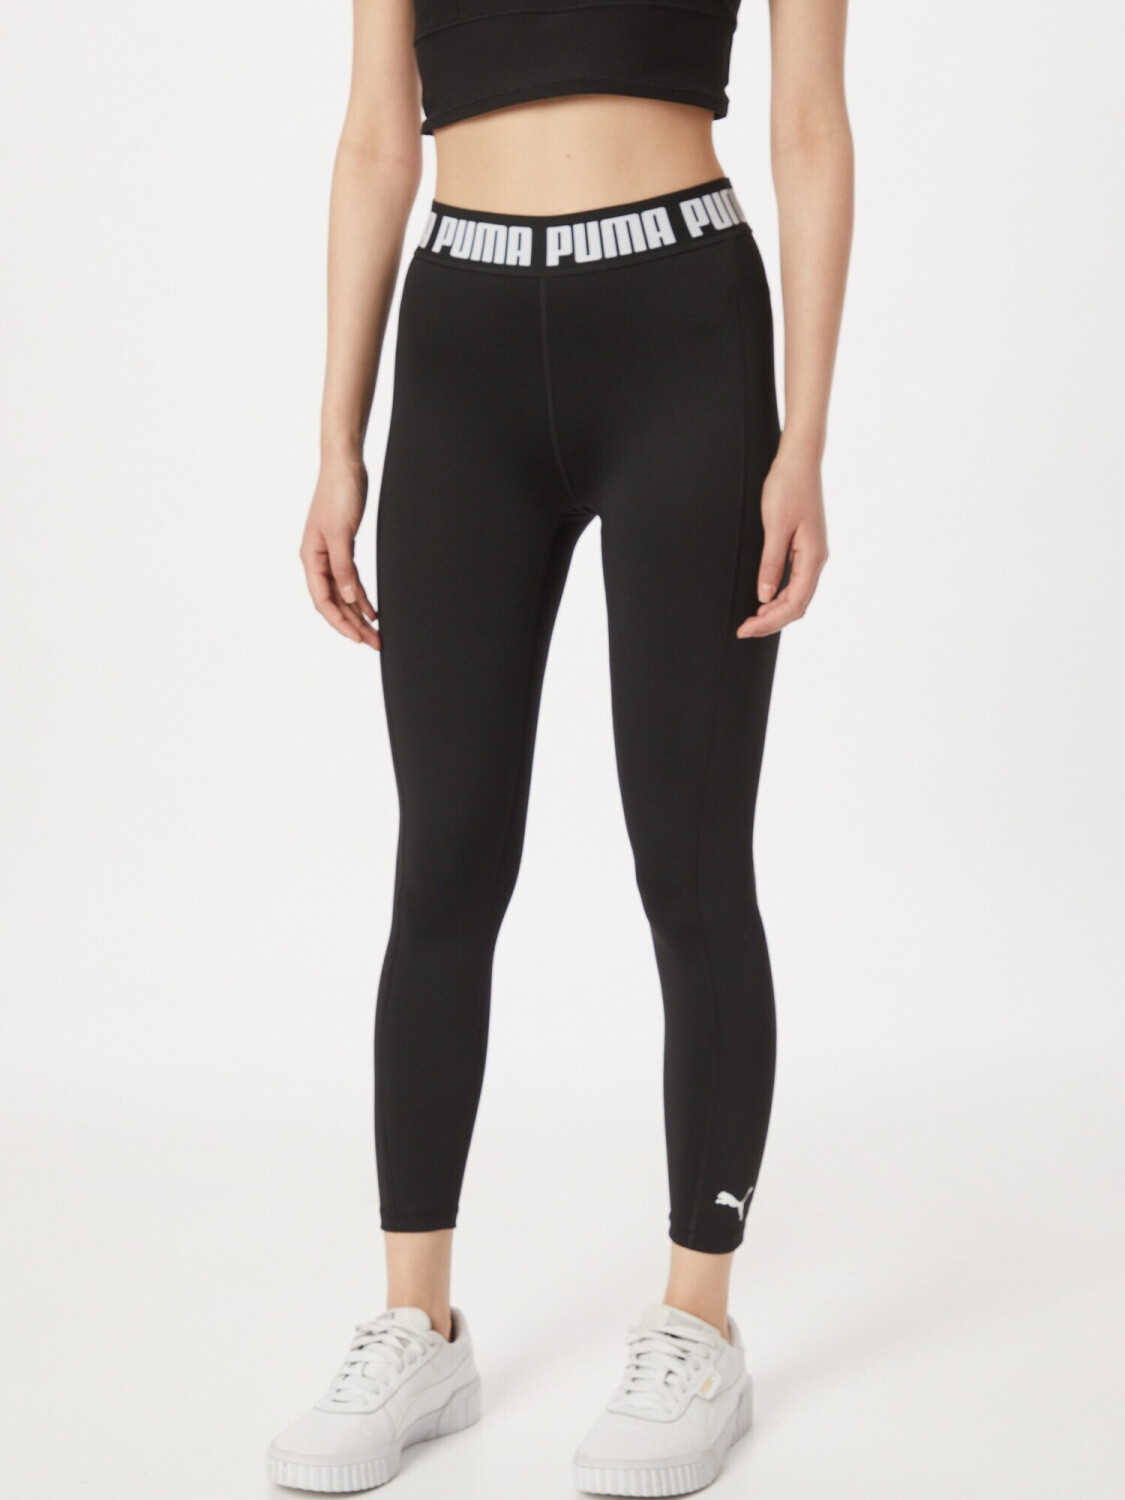 Best on (521601) black Buy Deals Leggings High from Full puma Waist Strong £12.00 Puma (Today) –